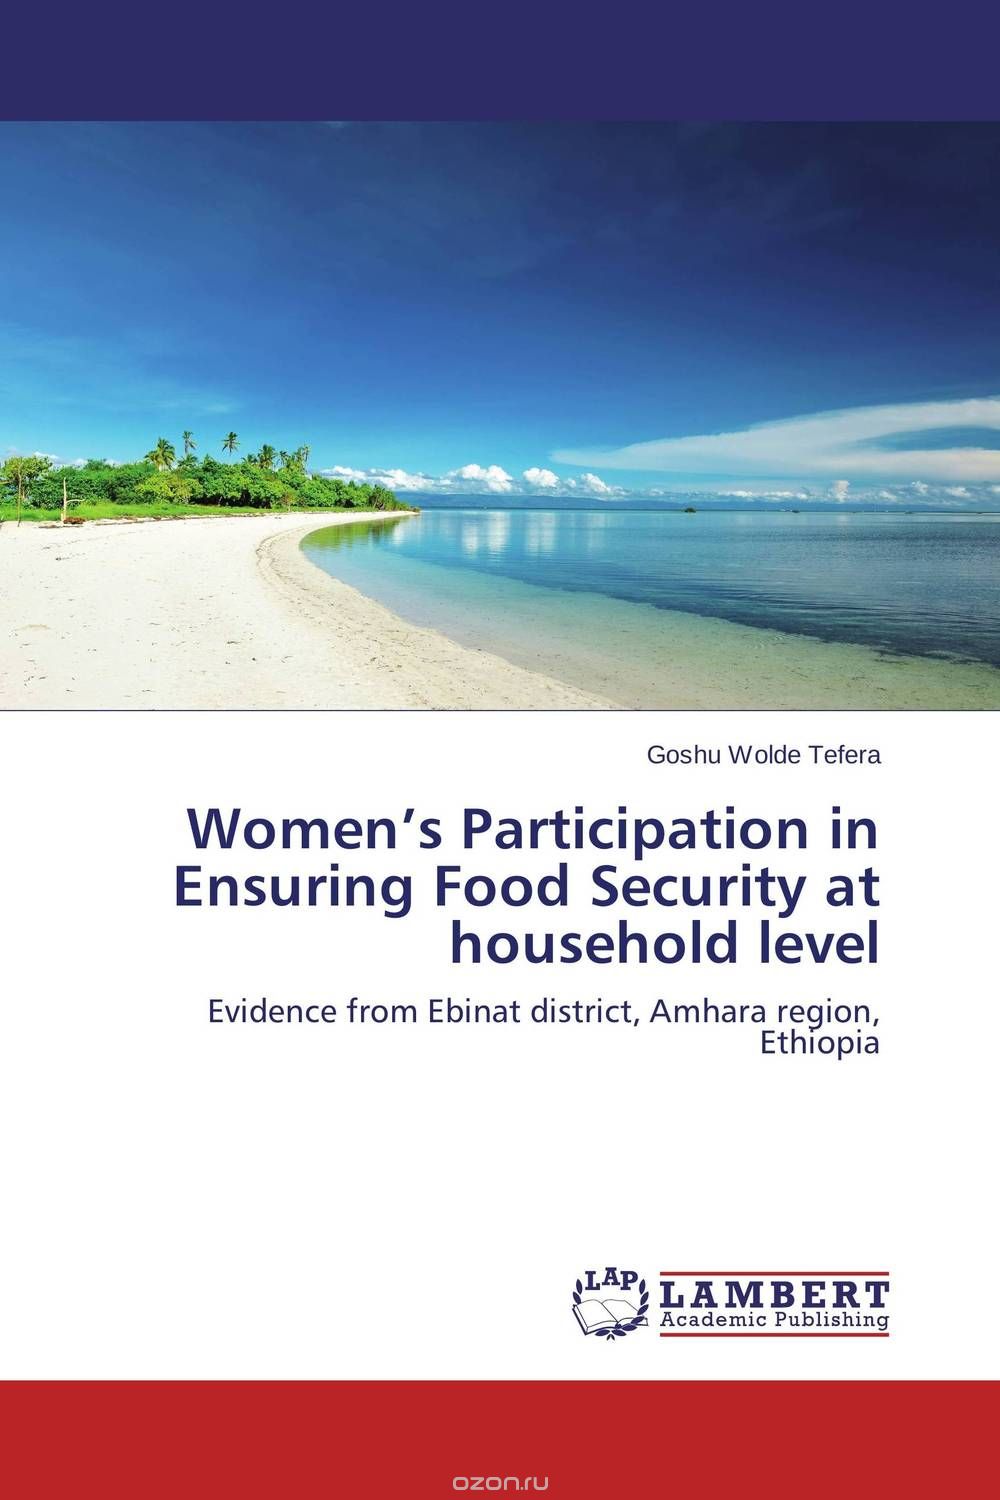 Скачать книгу "Women’s Participation in Ensuring Food Security at household level"